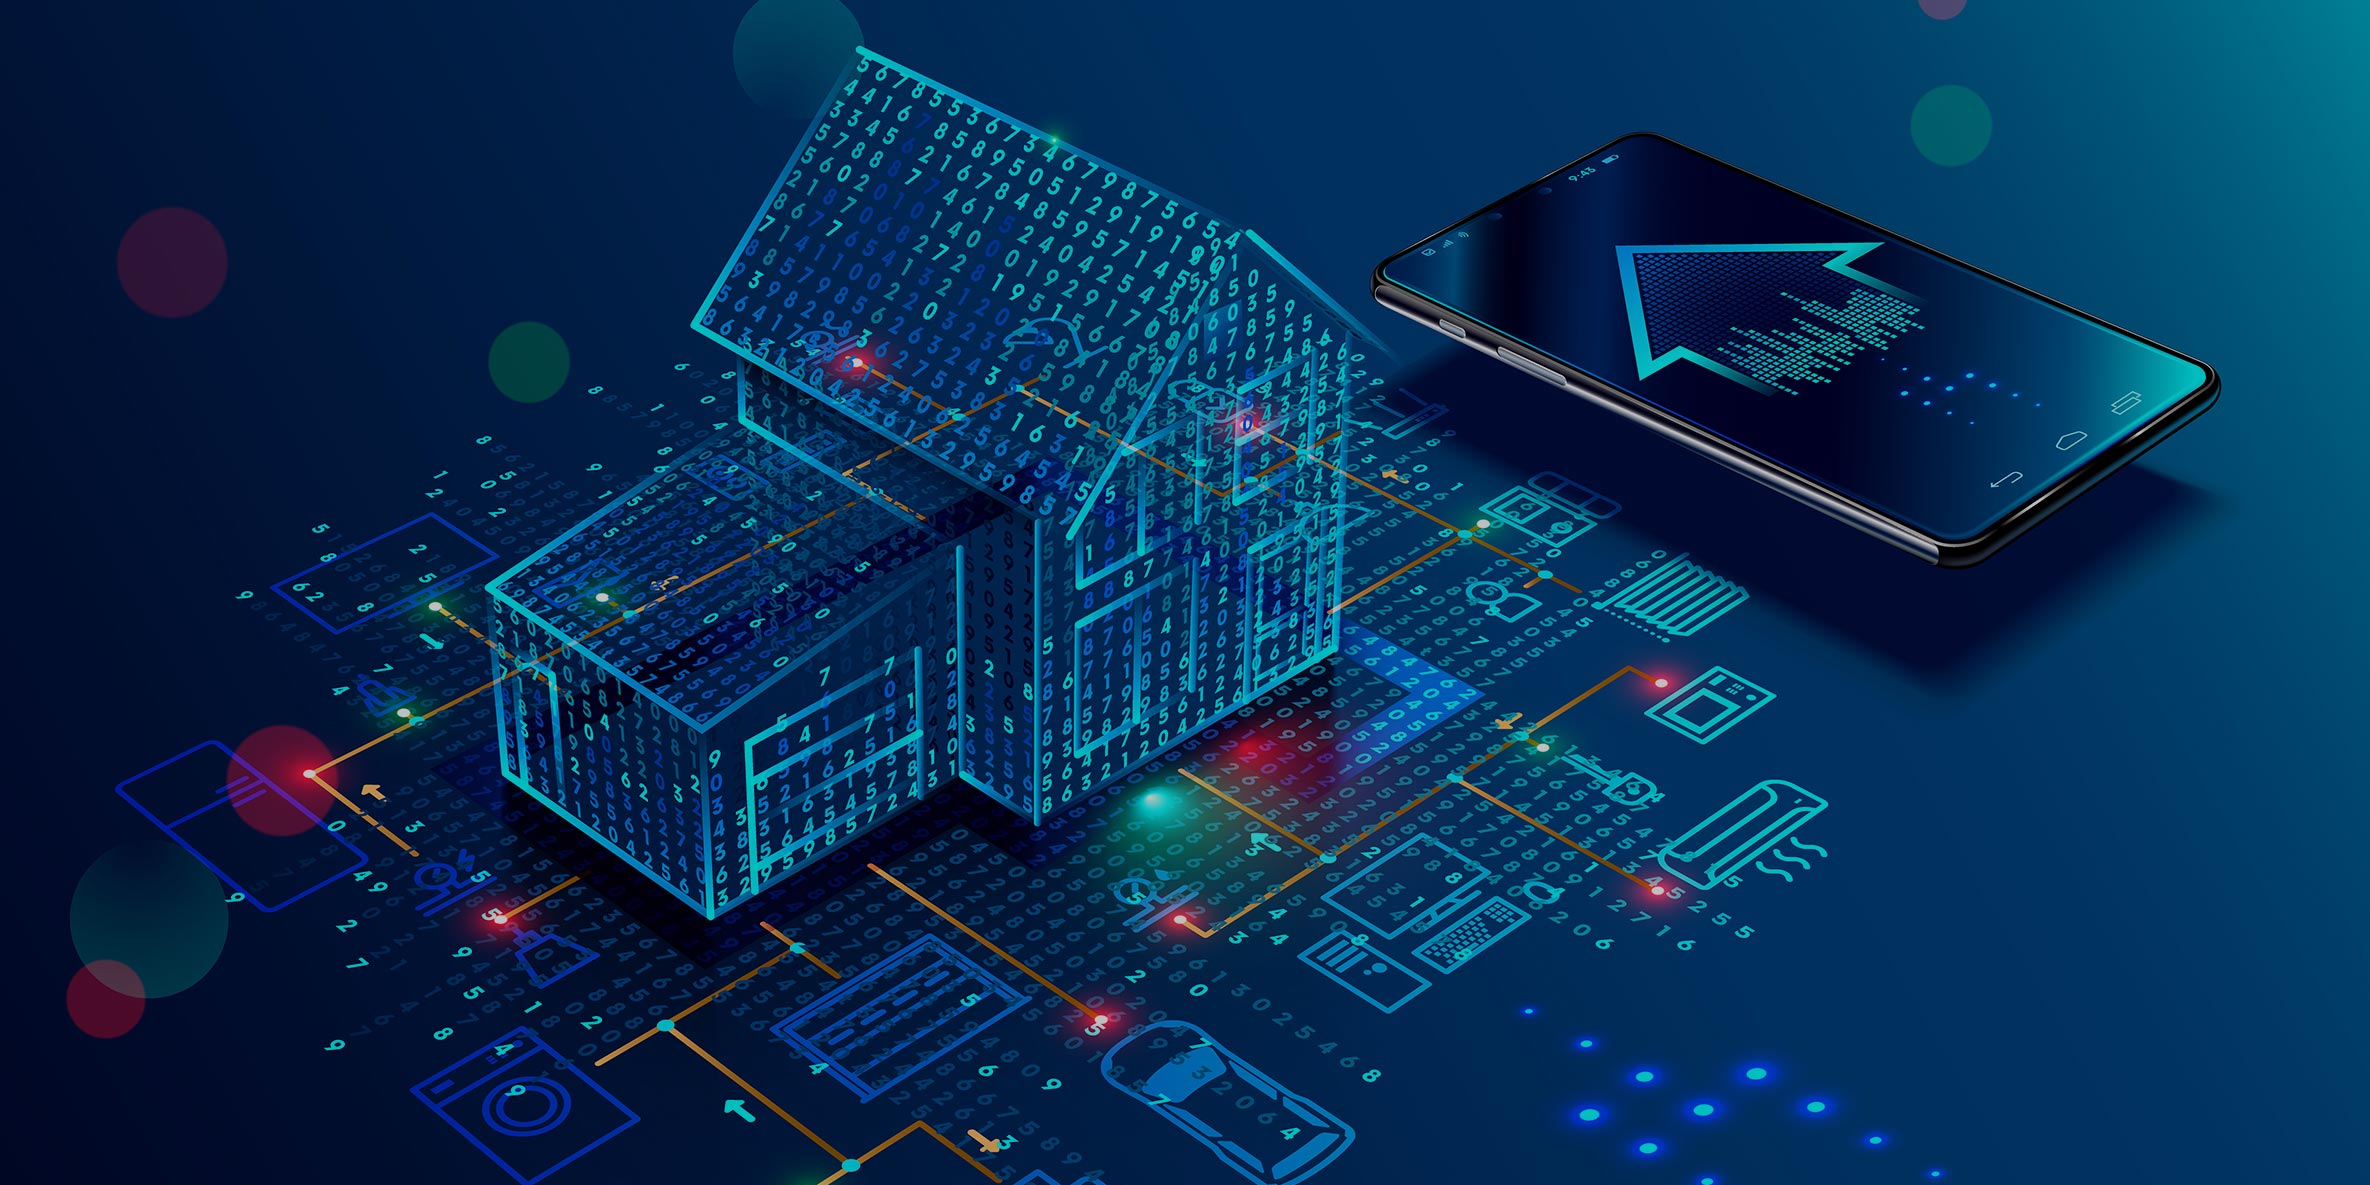 Why Automated Homes Need Stronger Cyber Security